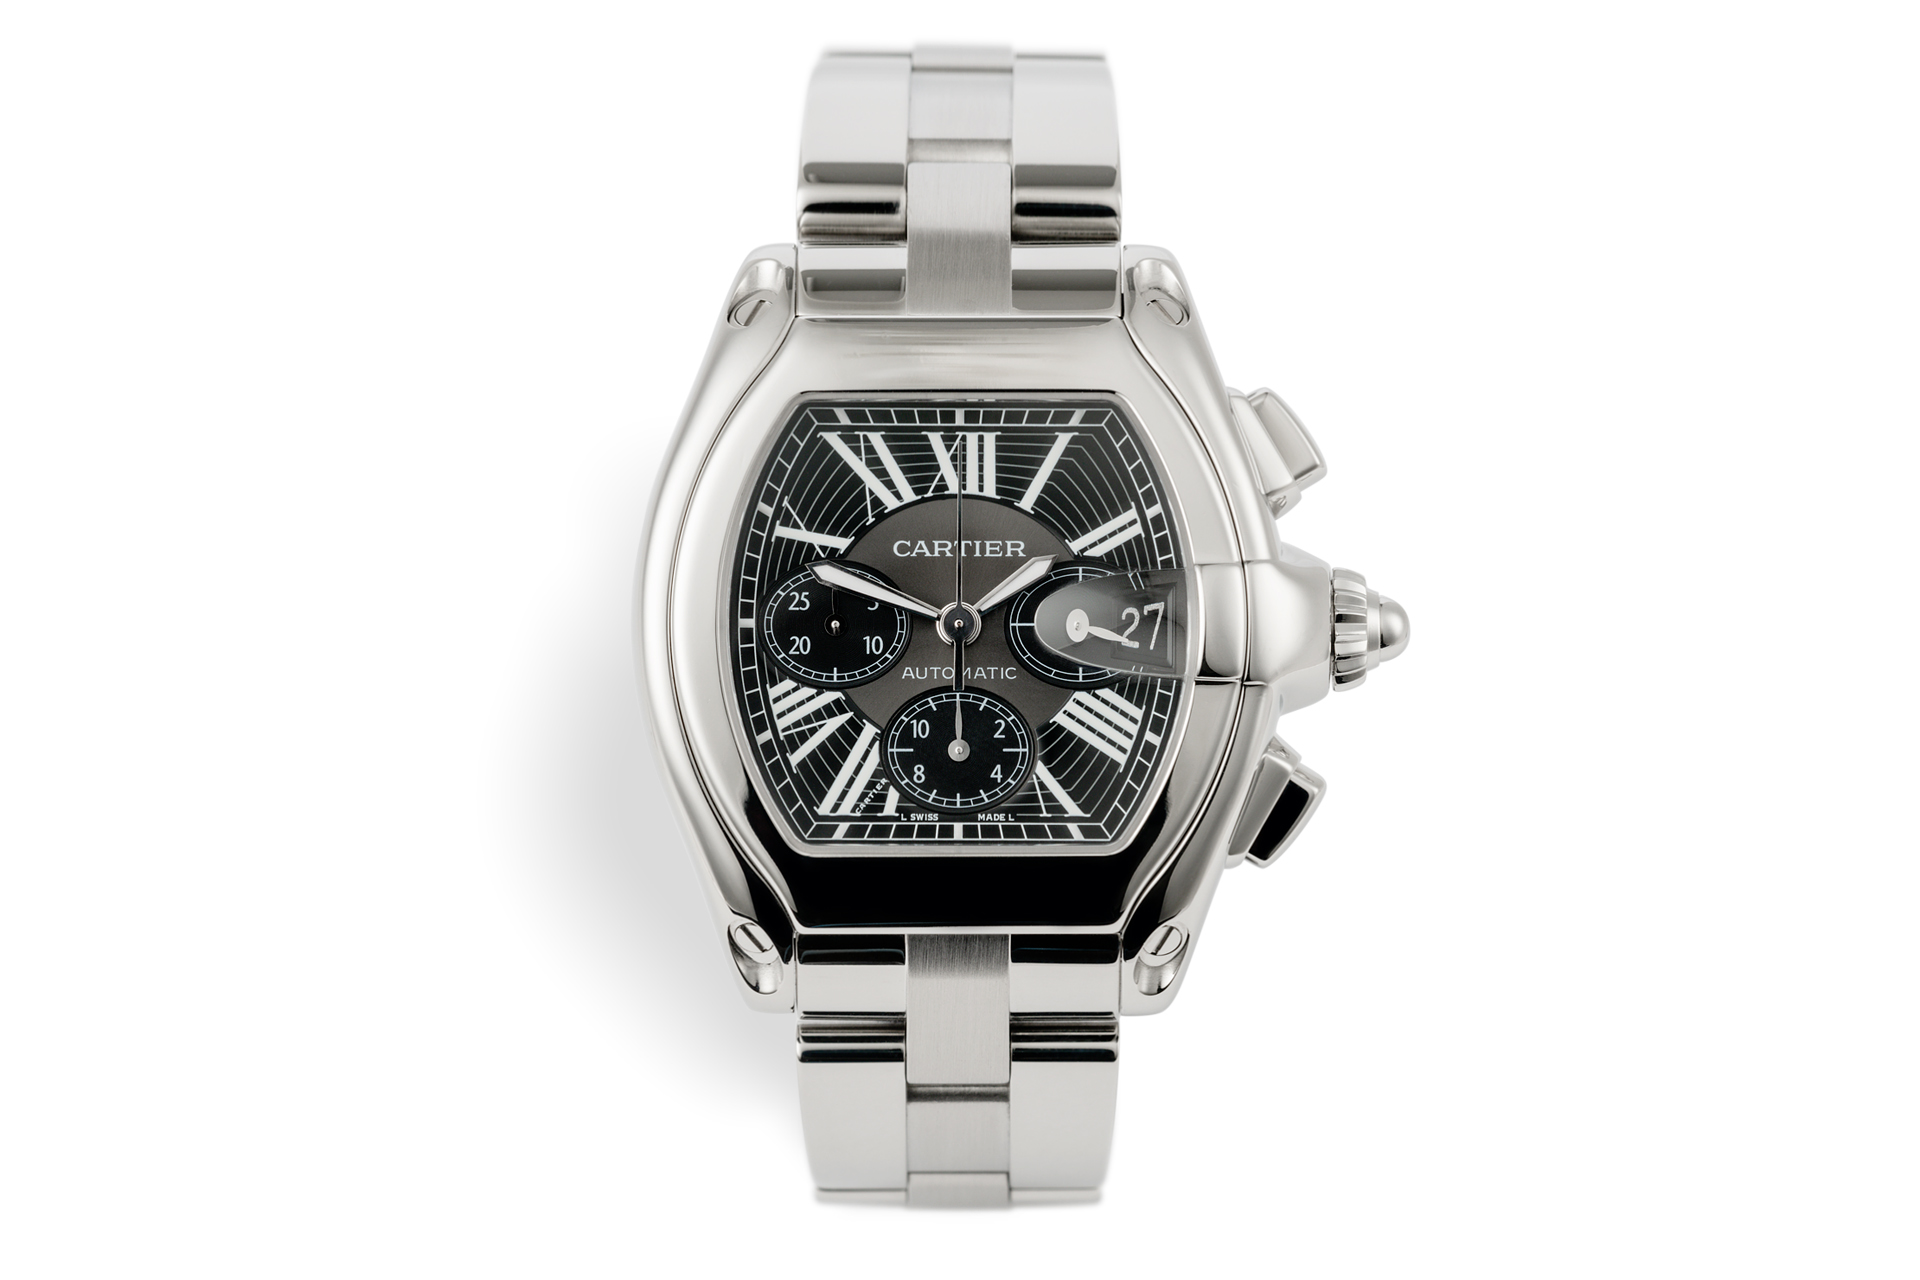 Cartier Roadster XL Chronograph Watches 